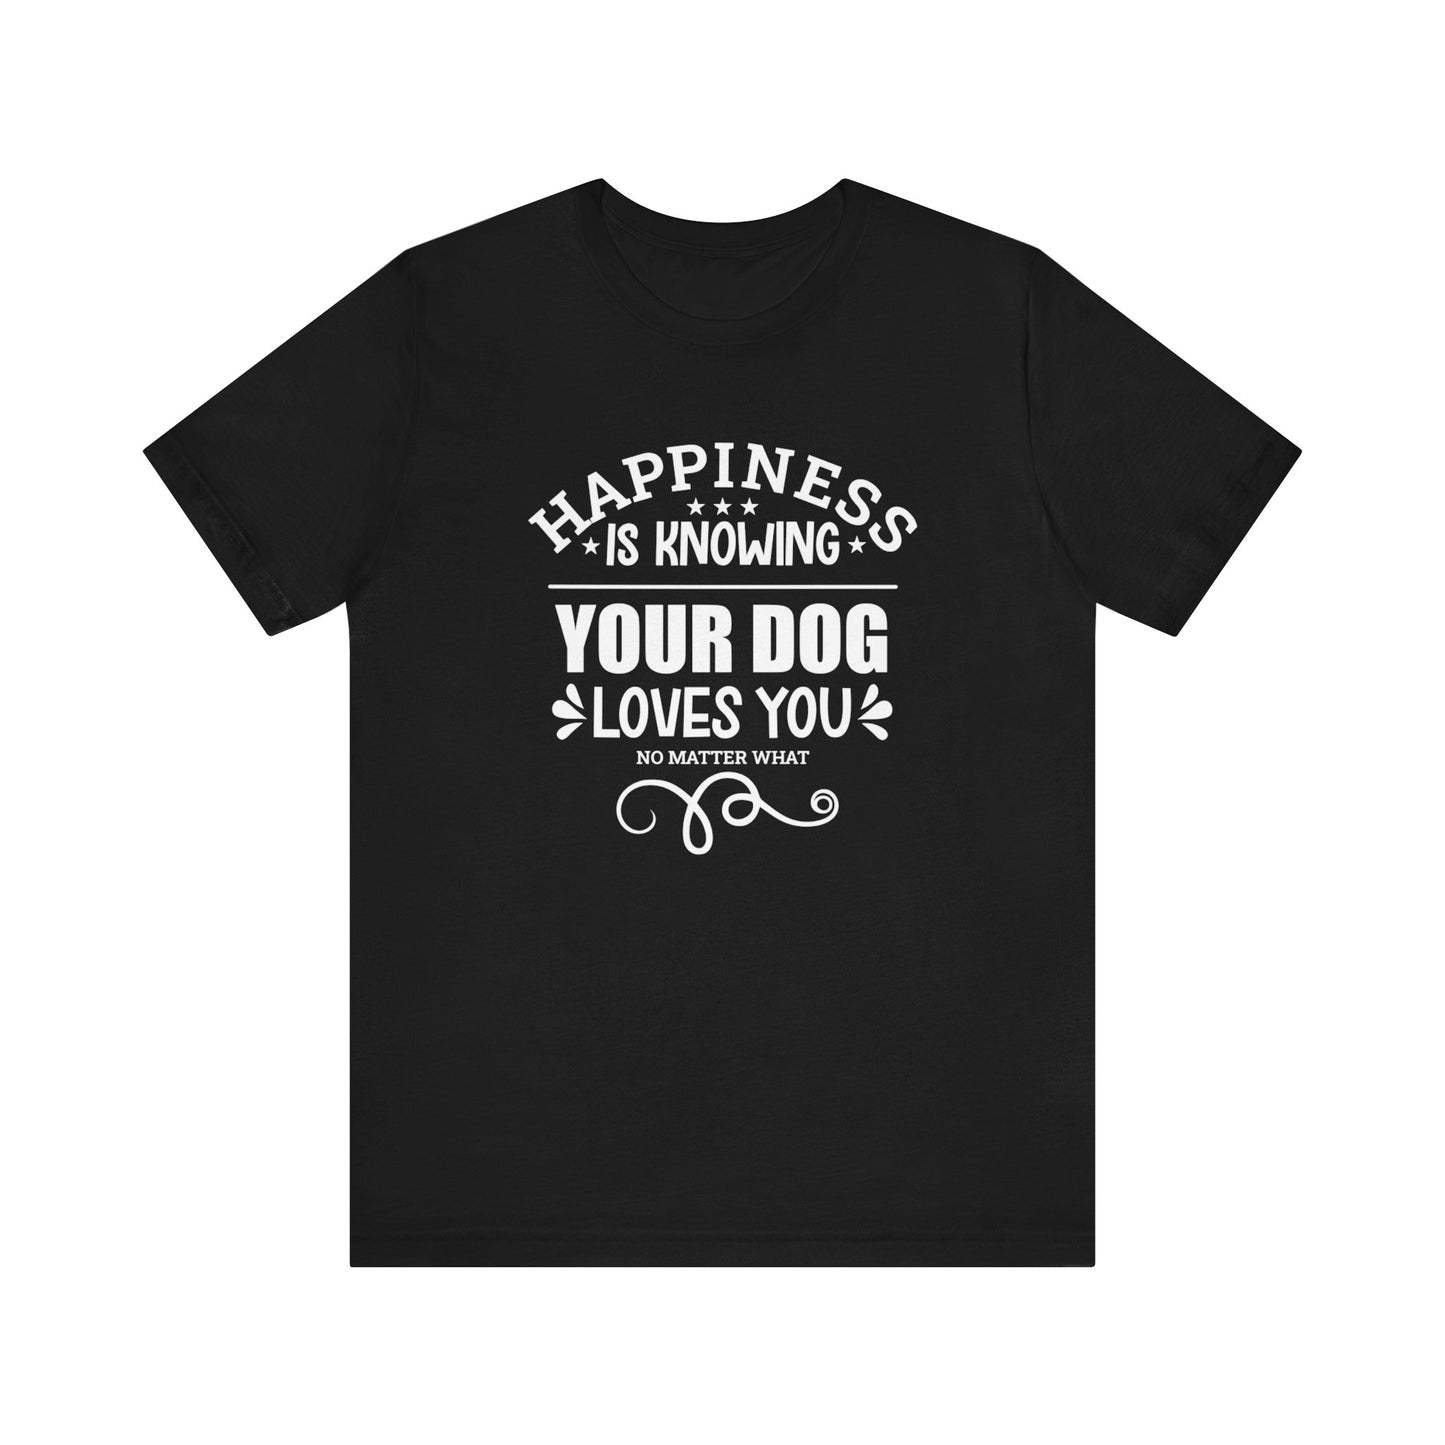 A black unisex tshirt, featuring the slogan 'Happiness is knowing your dog loves you no matter what,' by Dogs Pure Love, is set against a white background.